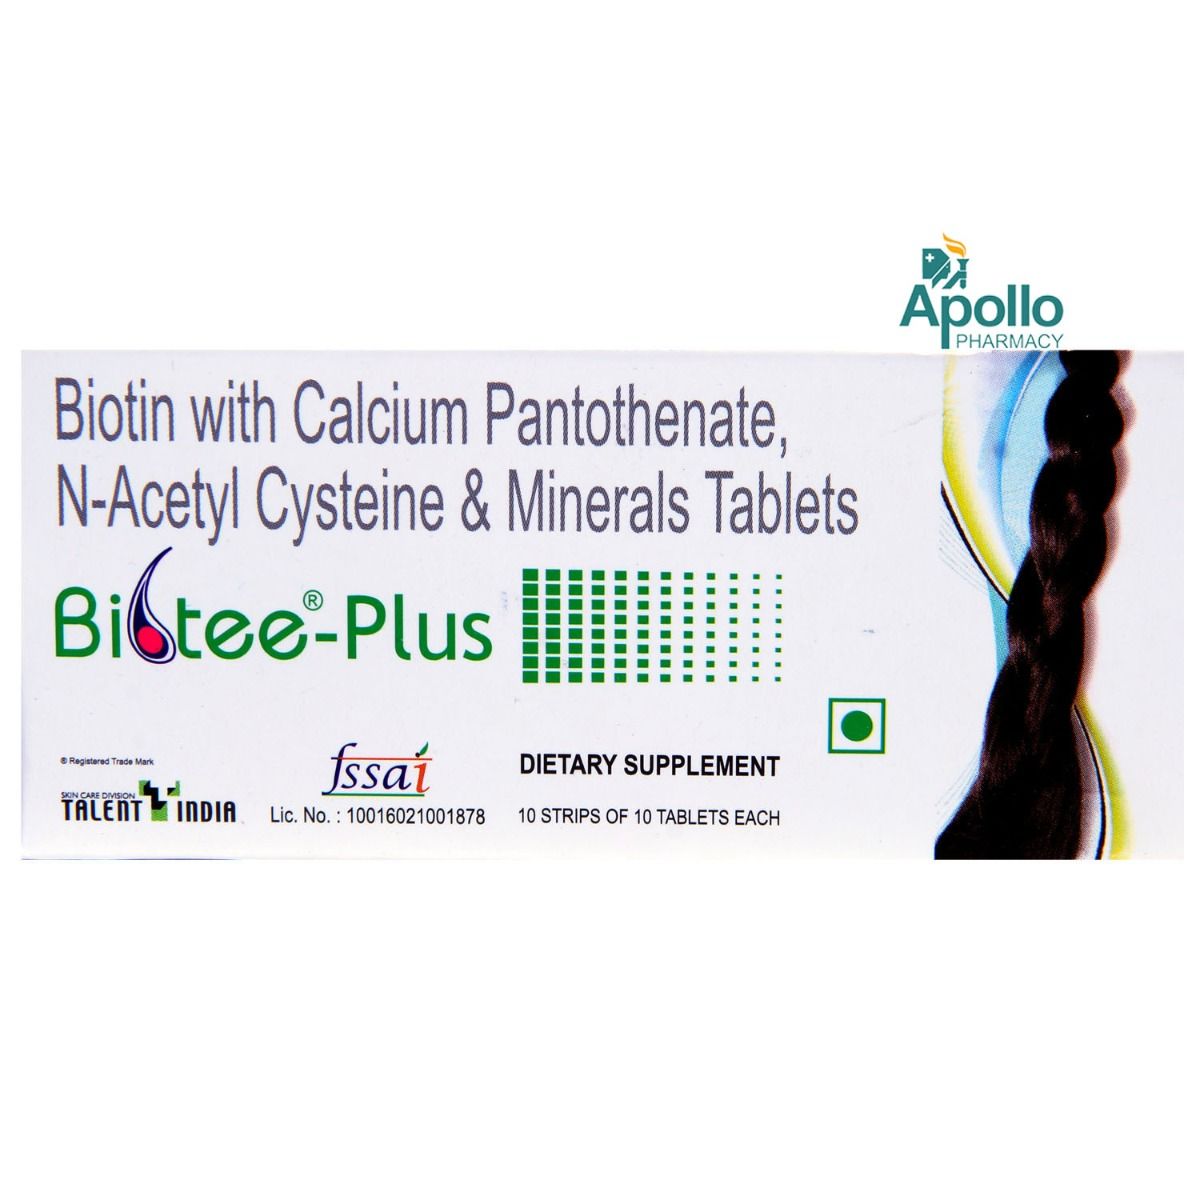 Biotee-Plus Tablet 10's Price, Uses, Side Effects, Composition - Apollo  Pharmacy